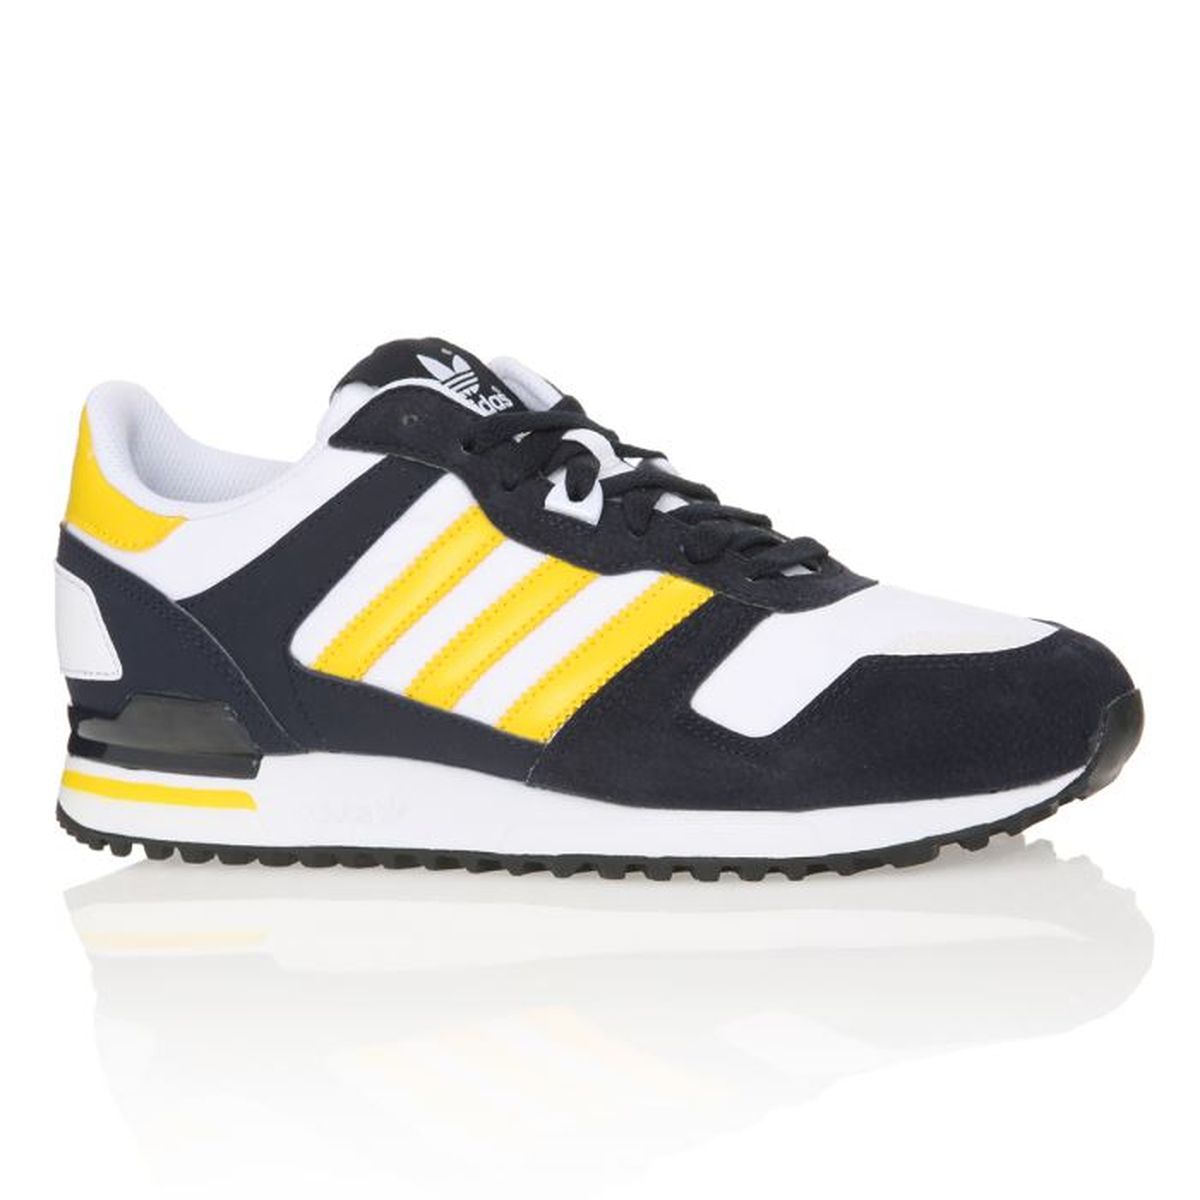 adidas zx 700 France homme